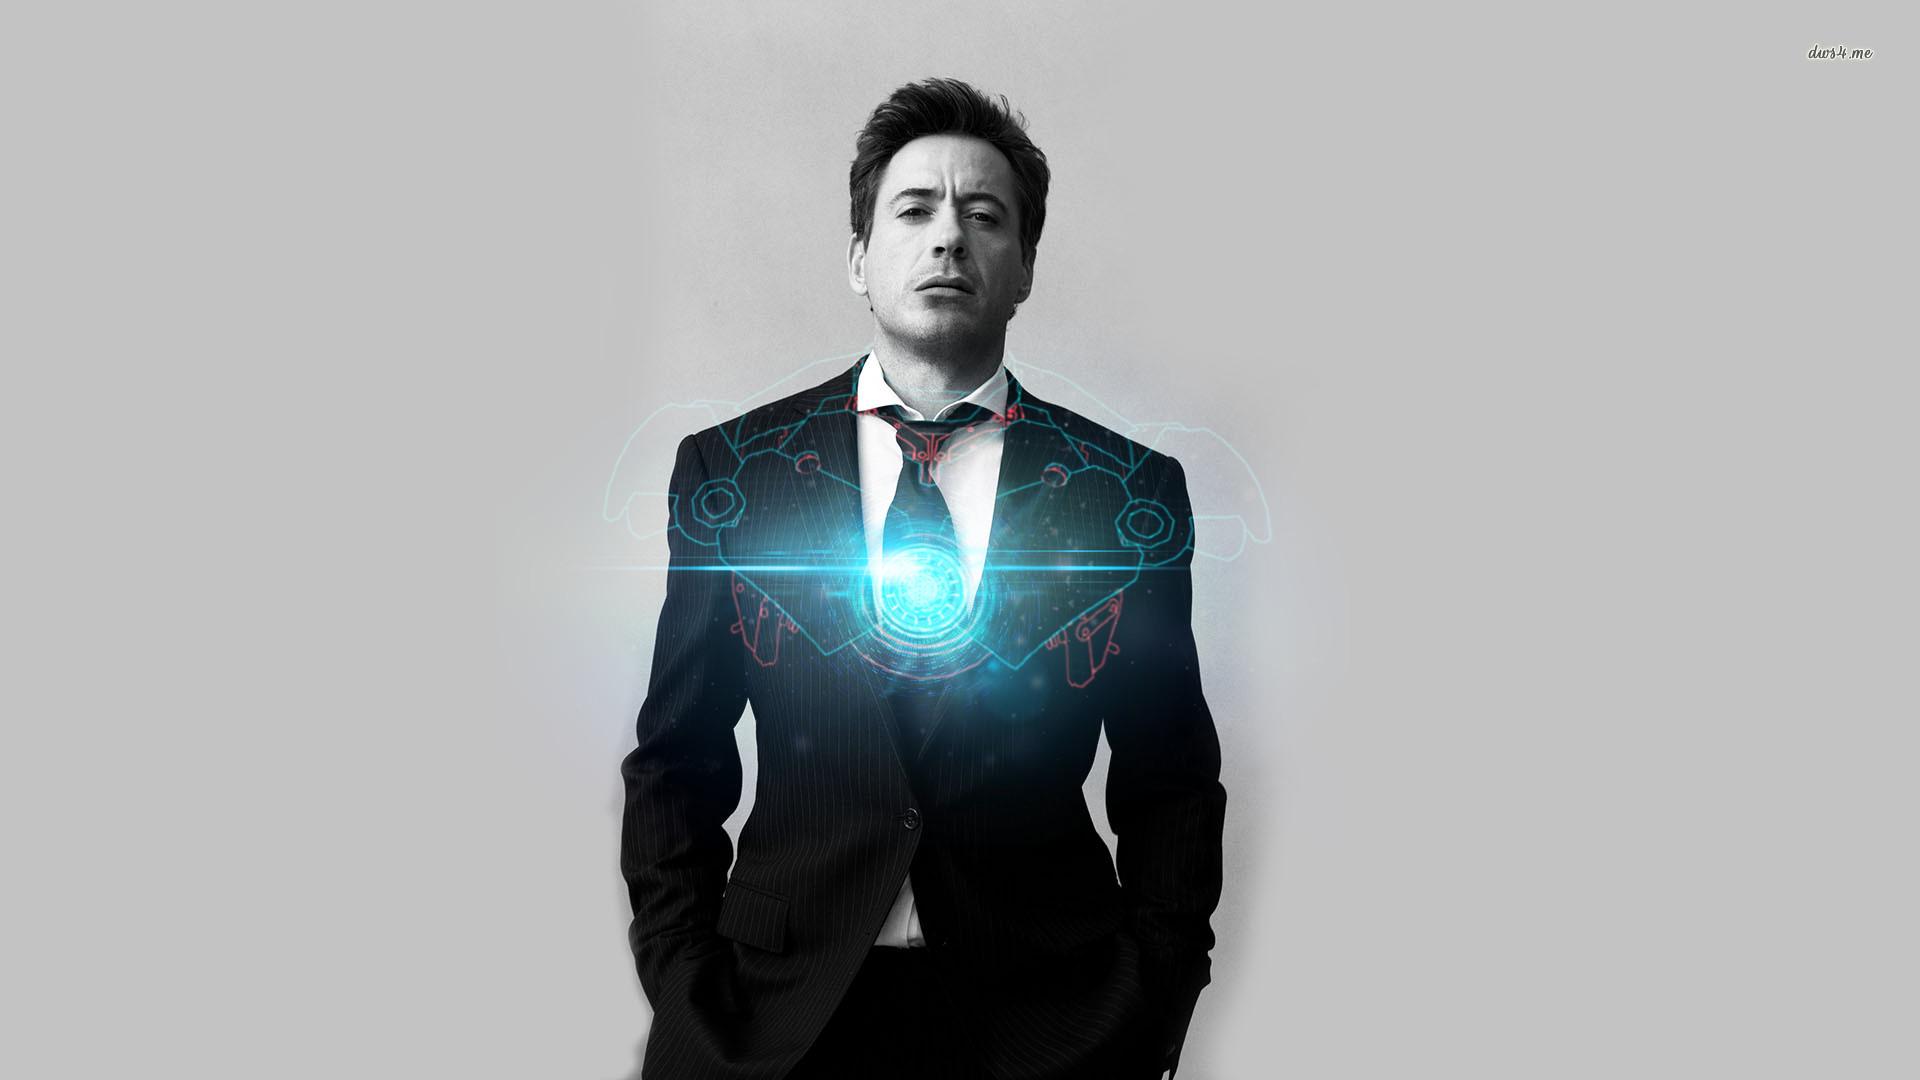 Tony Stark Wallpaper Group , Download for free